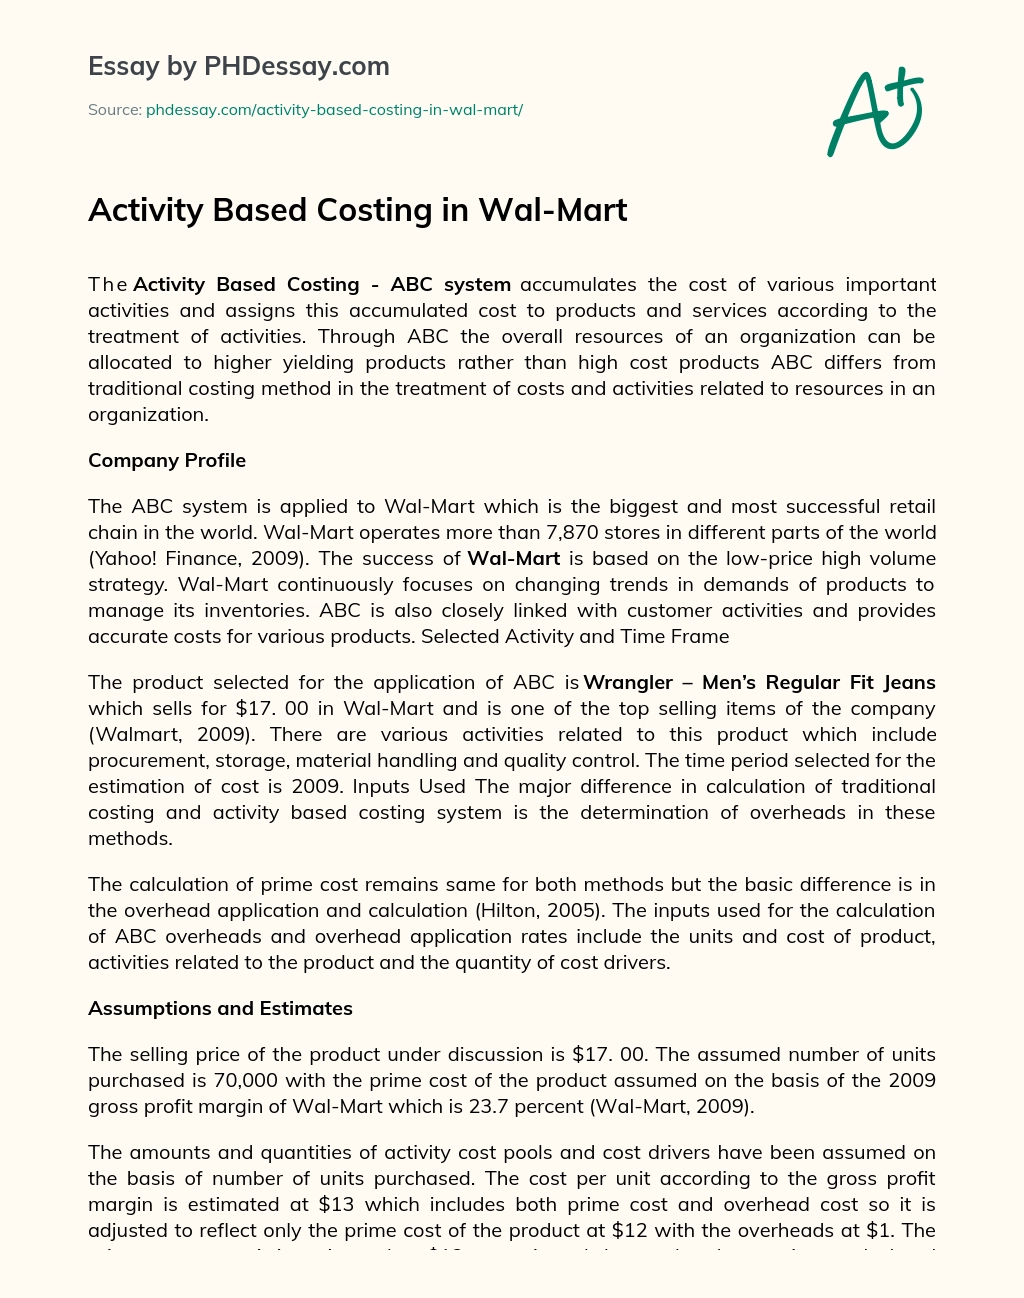 Activity Based Costing in Wal-Mart essay